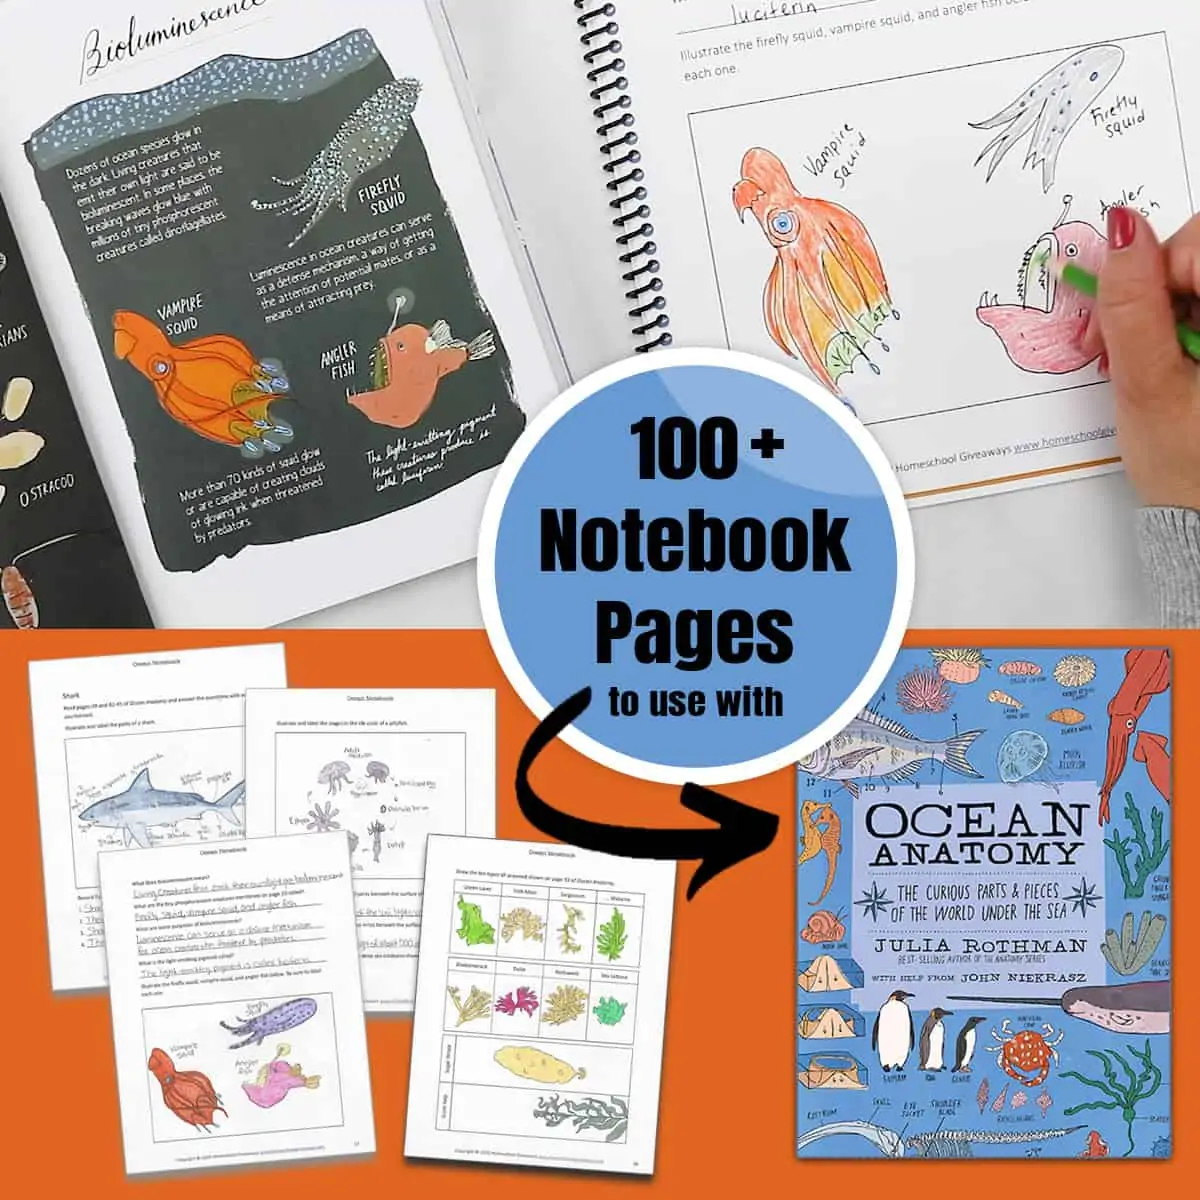 Completed notebooking pages for Ocean Anatomy by Julia Rothman